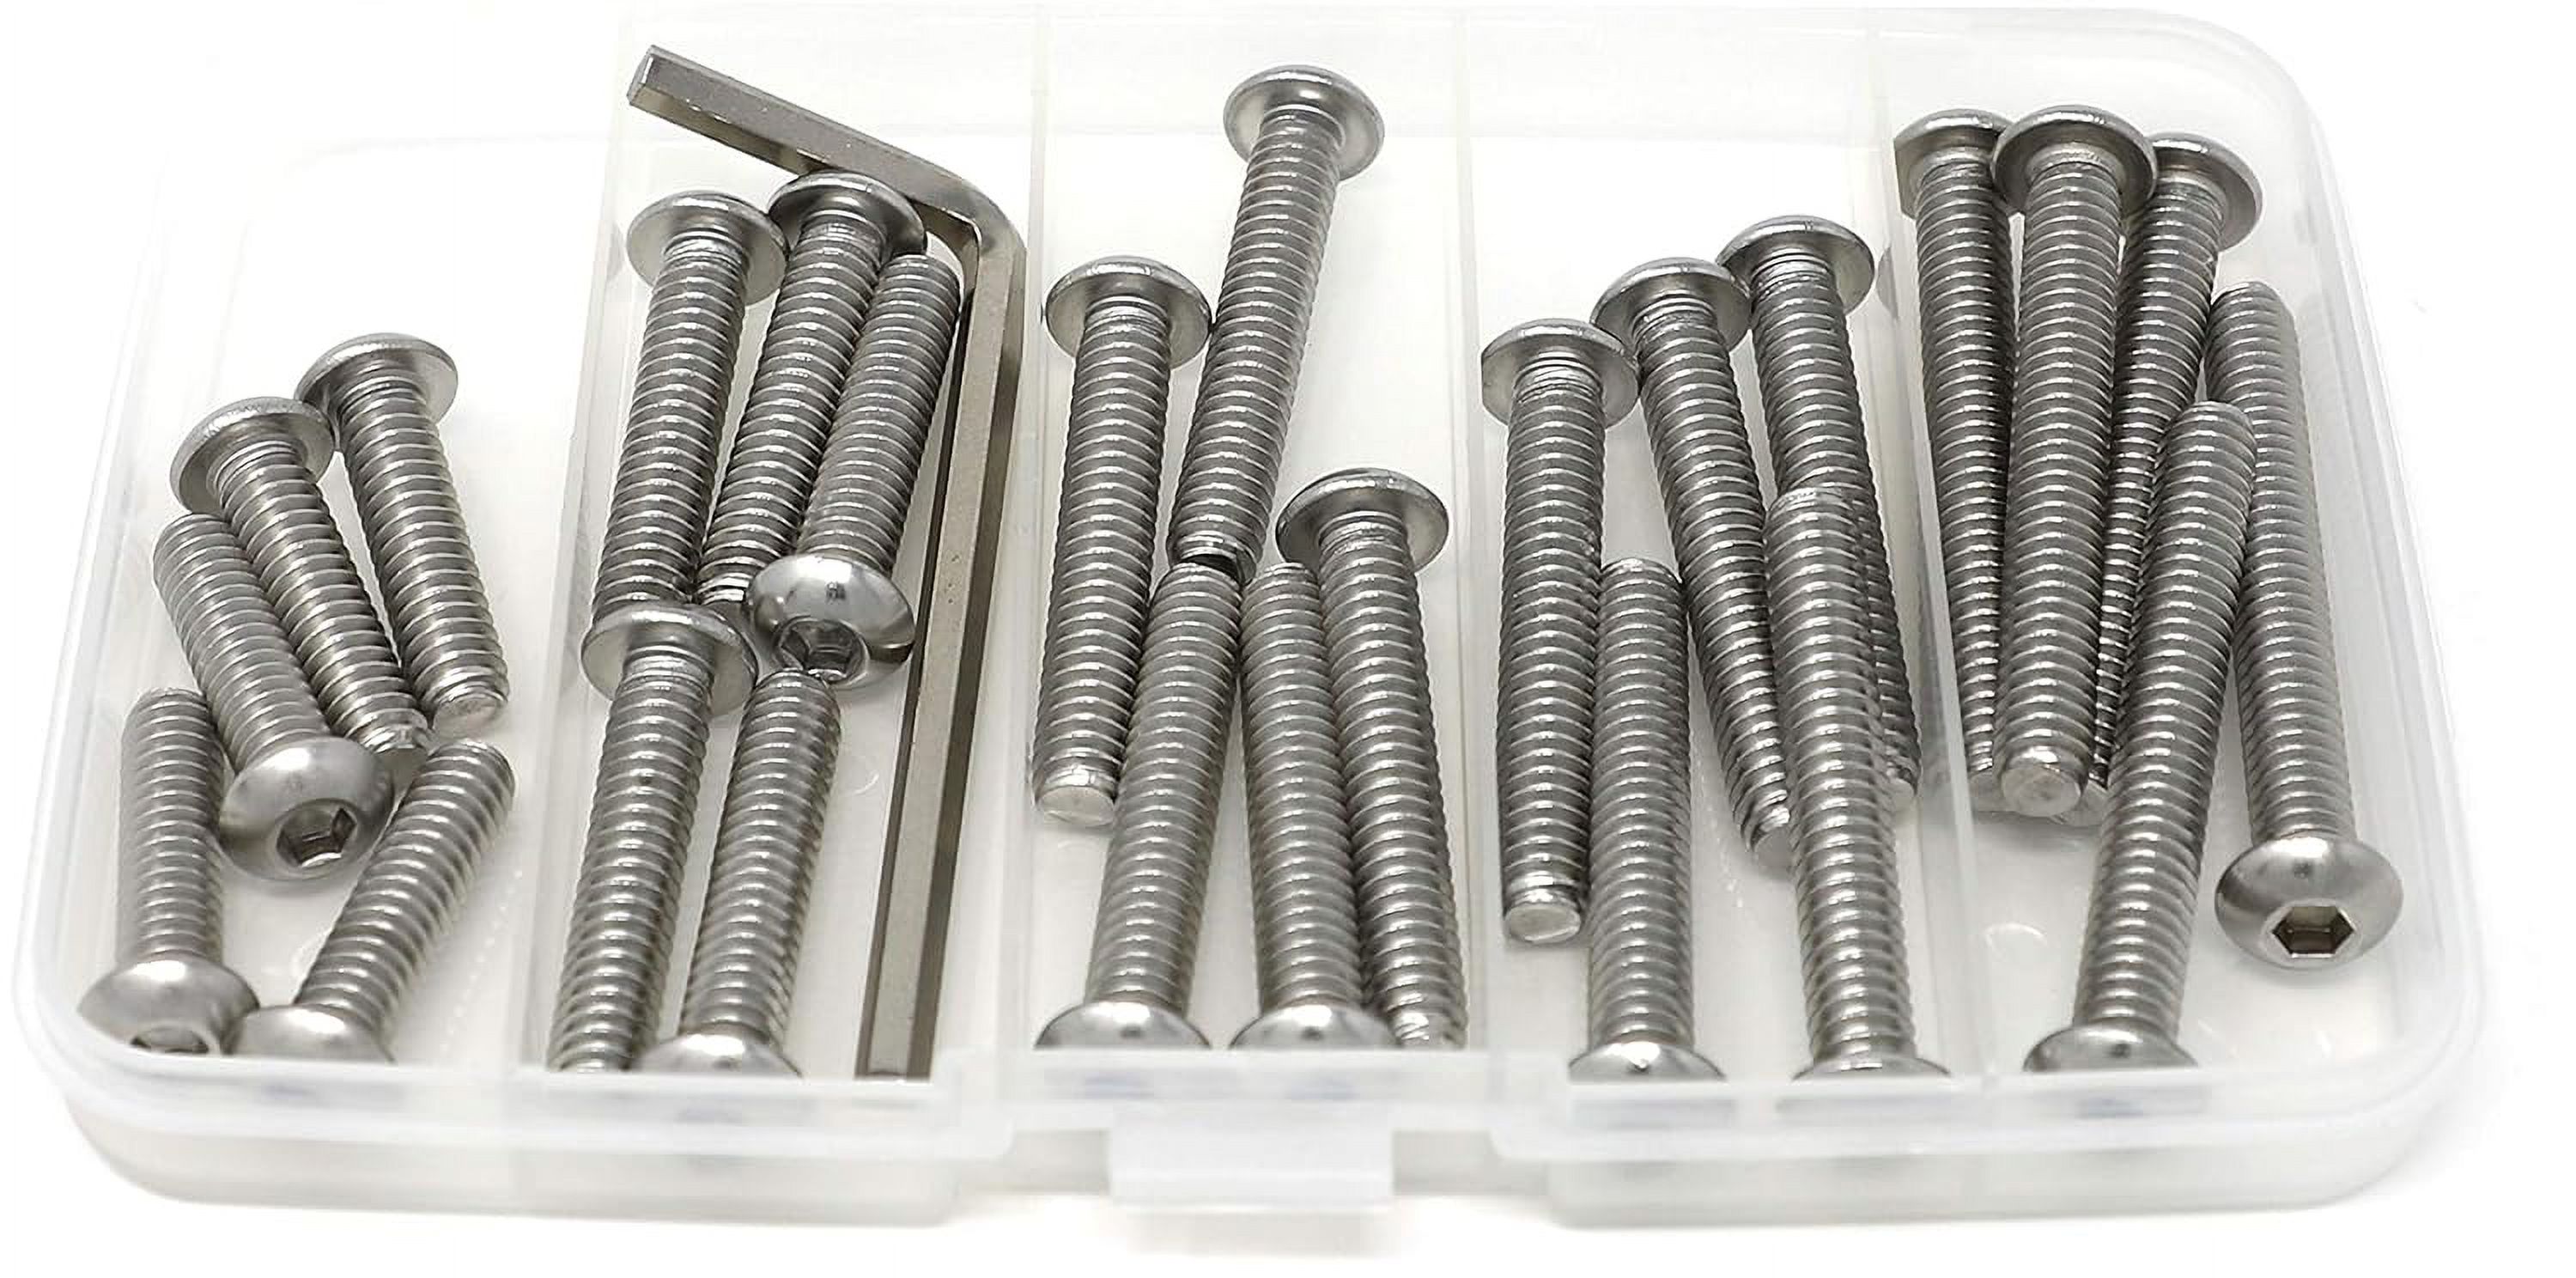 iexcell 25 Pcs SAE x 1, 2 UNC Threads Stainless Steel 304 Hex Socket Button Head Cap Screws Bolts Assortment Kit - image 3 of 4